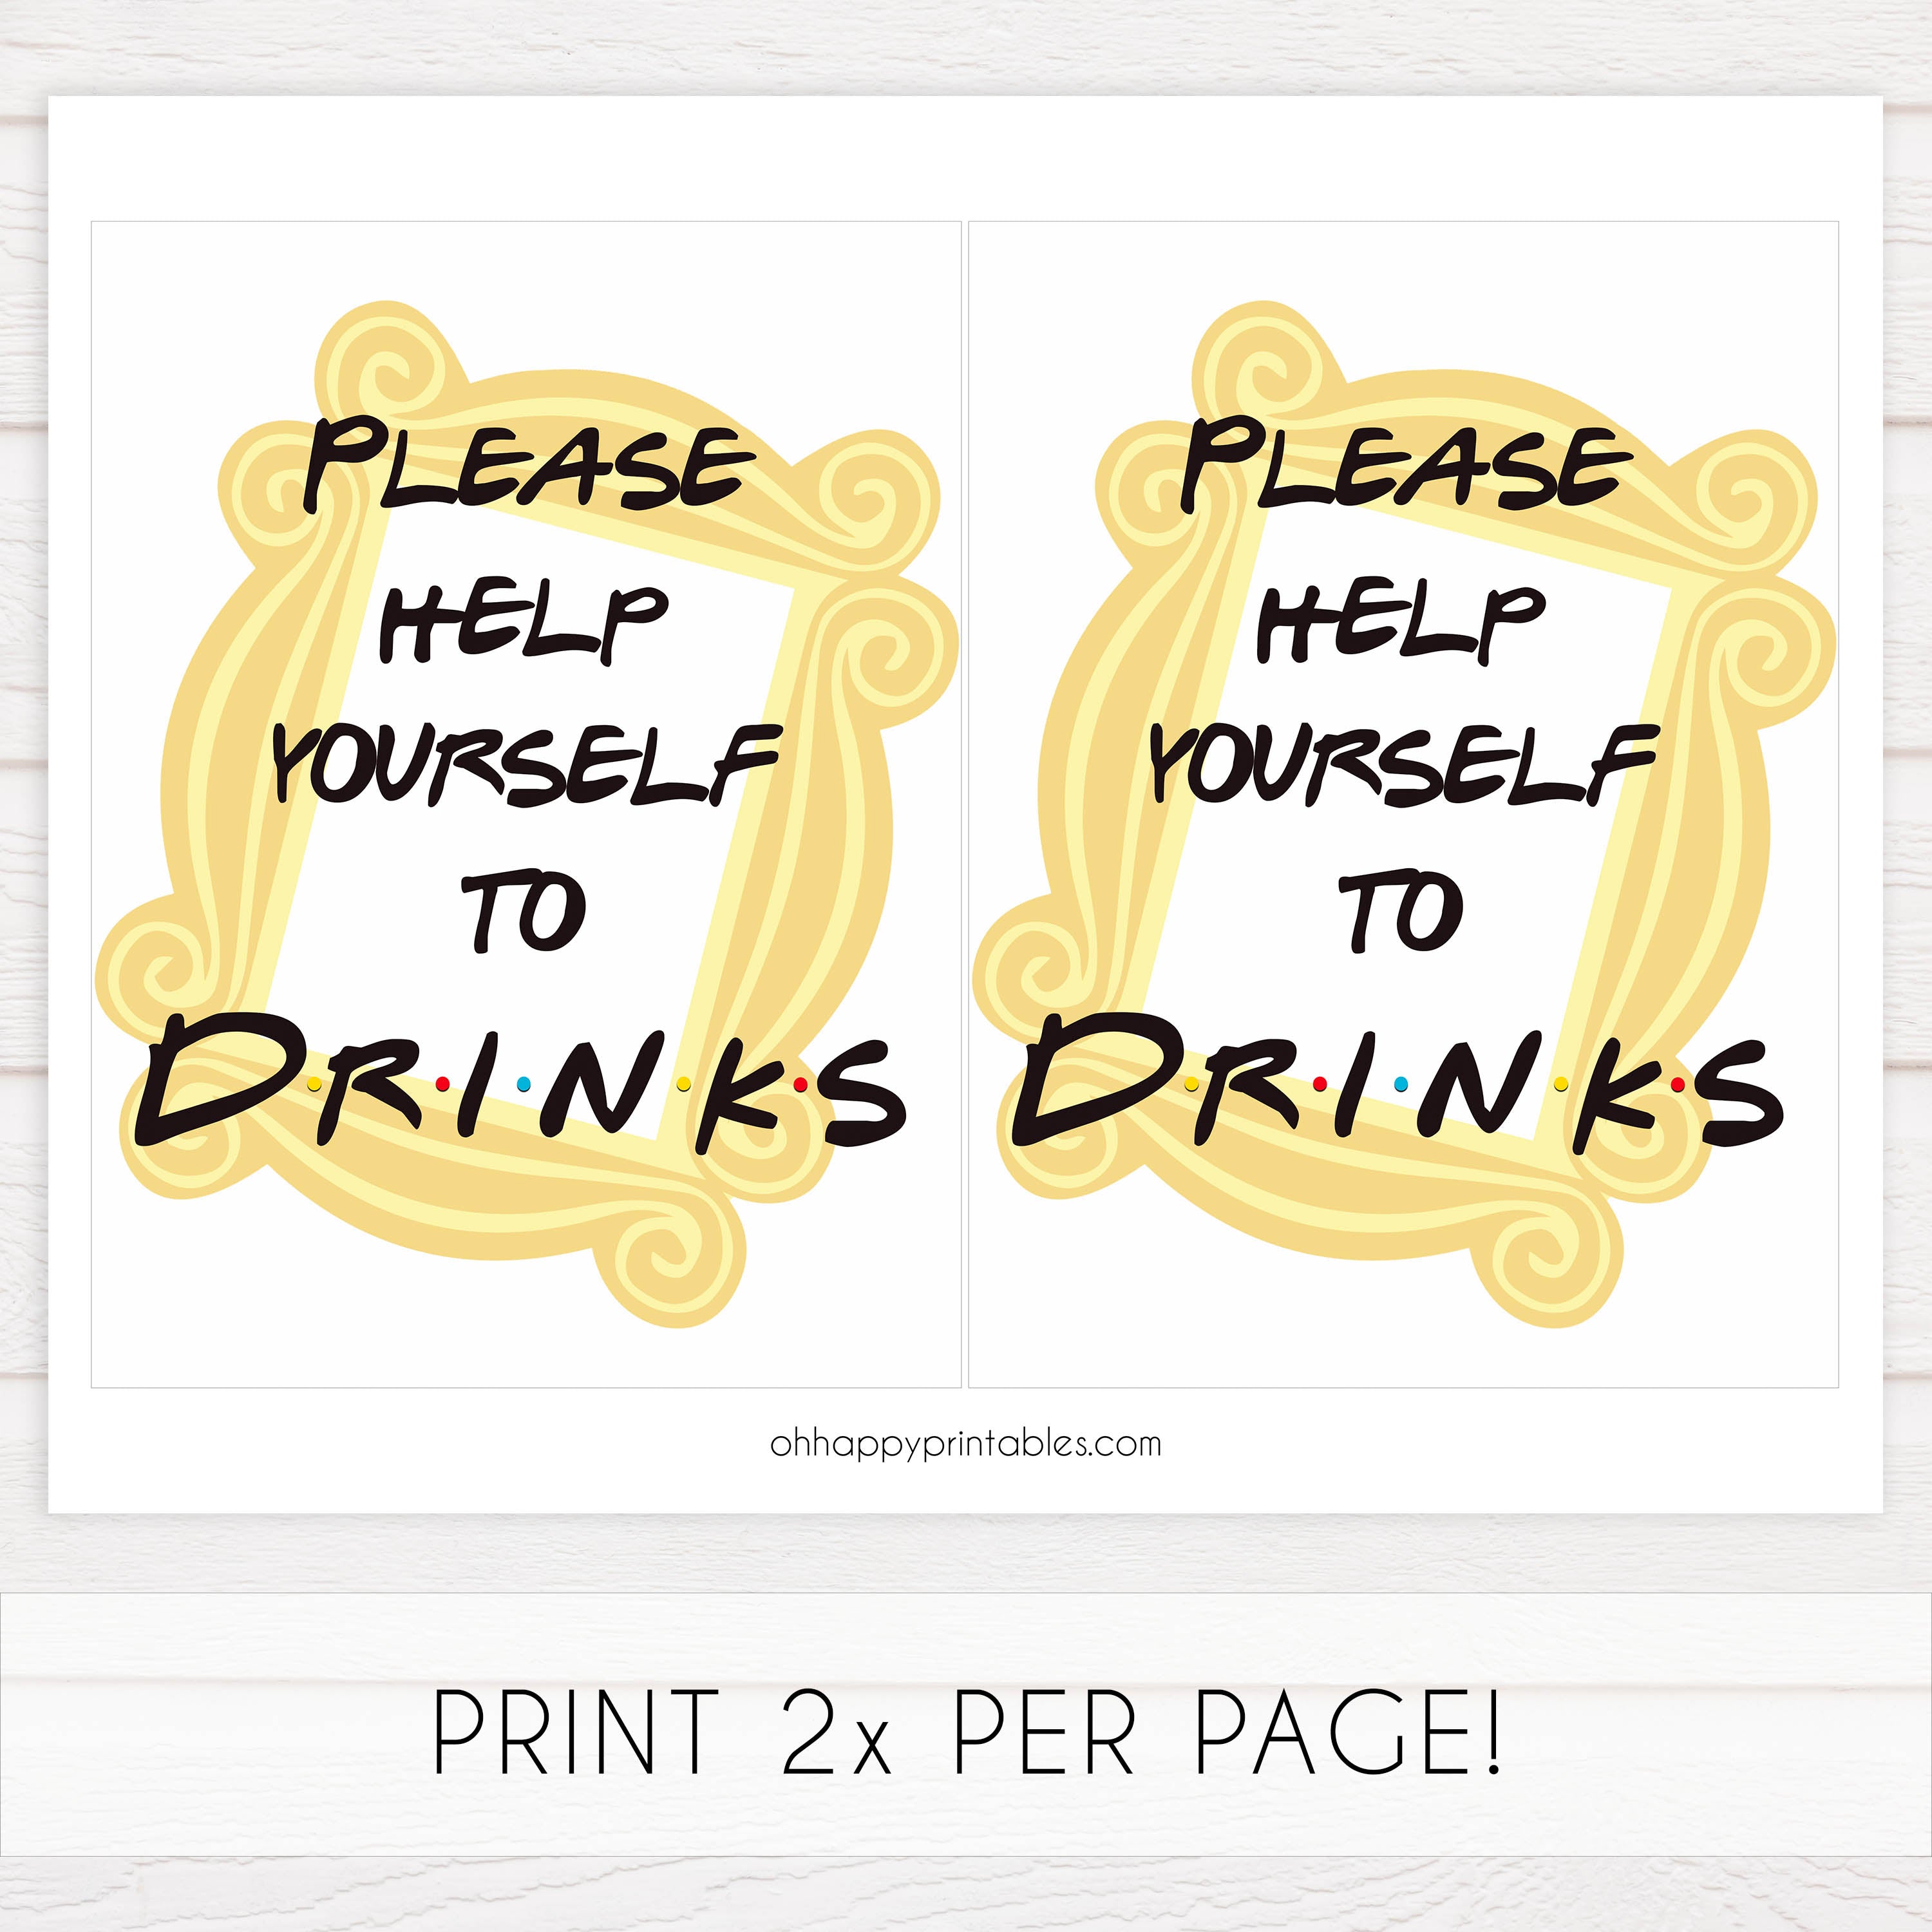 drinks baby table signs, Friends baby decor, printable baby table signs, printable baby decor, friends table signs, fun baby signs, friends fun baby table signs